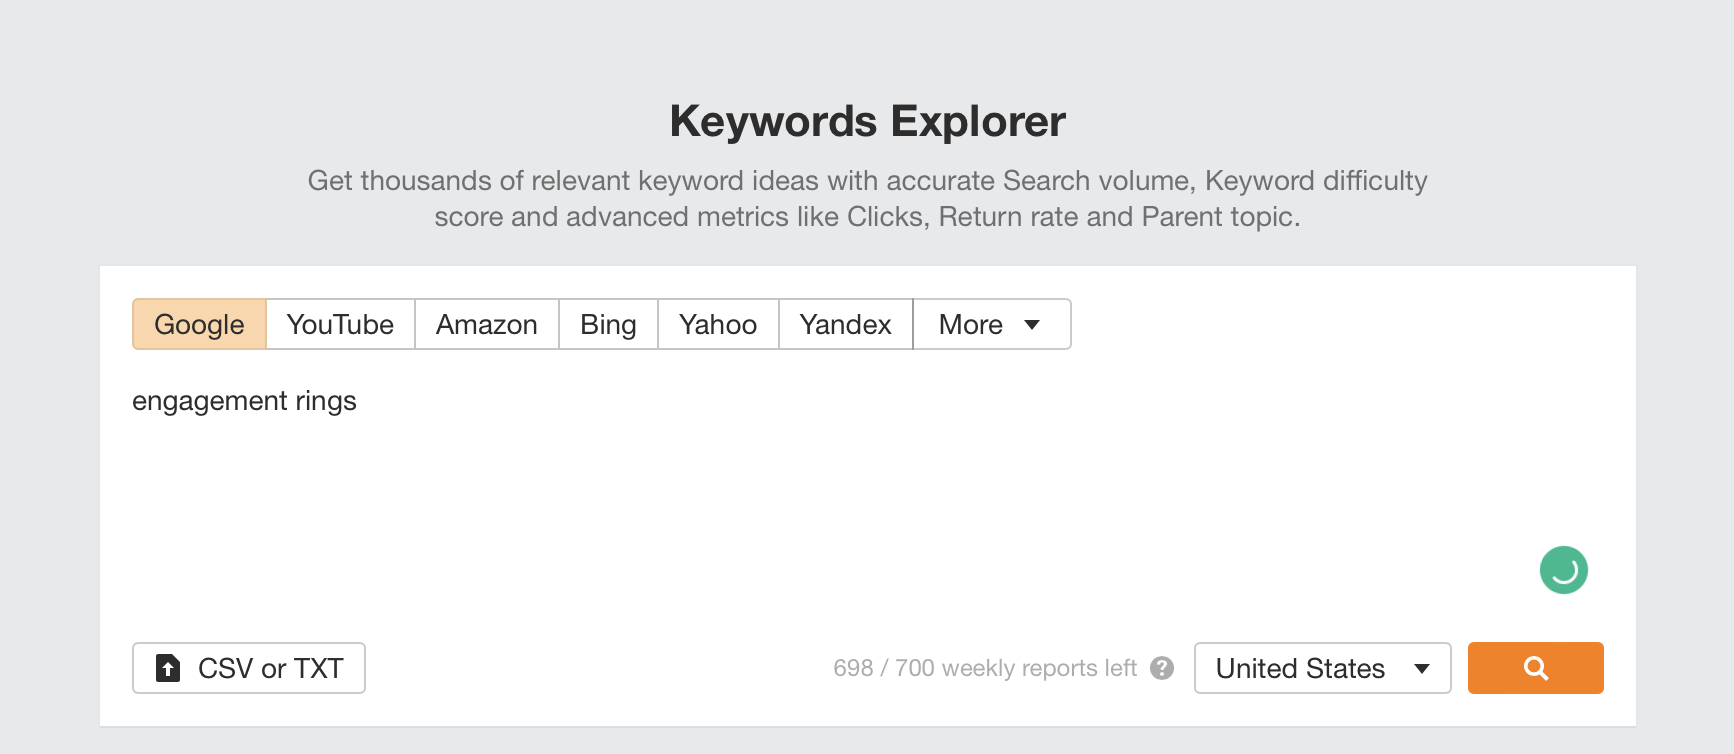 Keyword research starting from a broad category in Ahrefs' Keywords Explorer